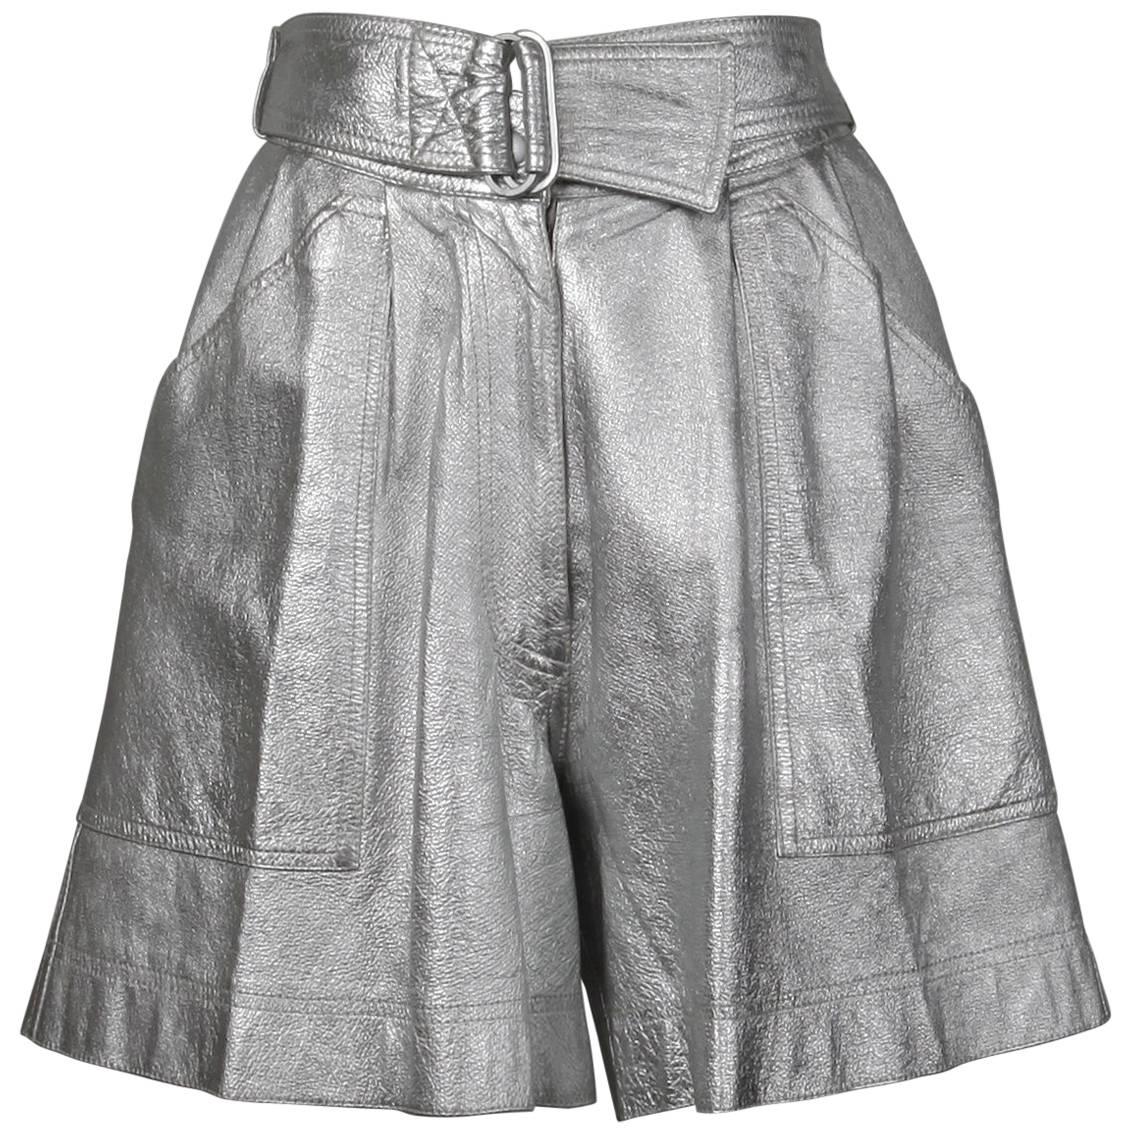 Krizia Vintage High Waist Metallic Silver Leather Shorts with Attached Belt